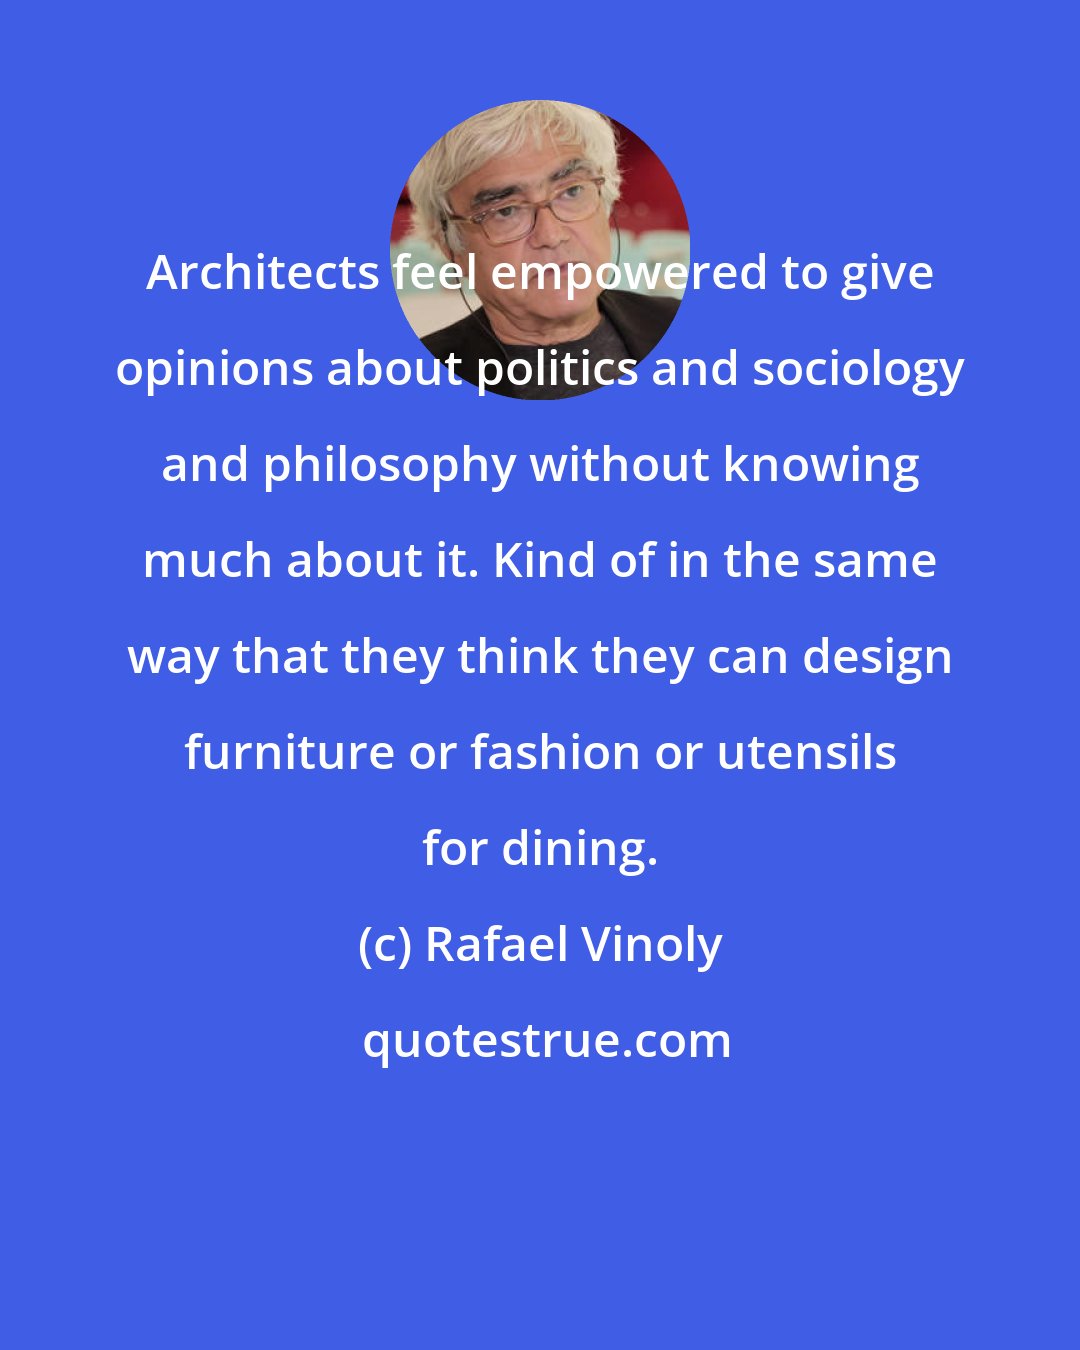 Rafael Vinoly: Architects feel empowered to give opinions about politics and sociology and philosophy without knowing much about it. Kind of in the same way that they think they can design furniture or fashion or utensils for dining.